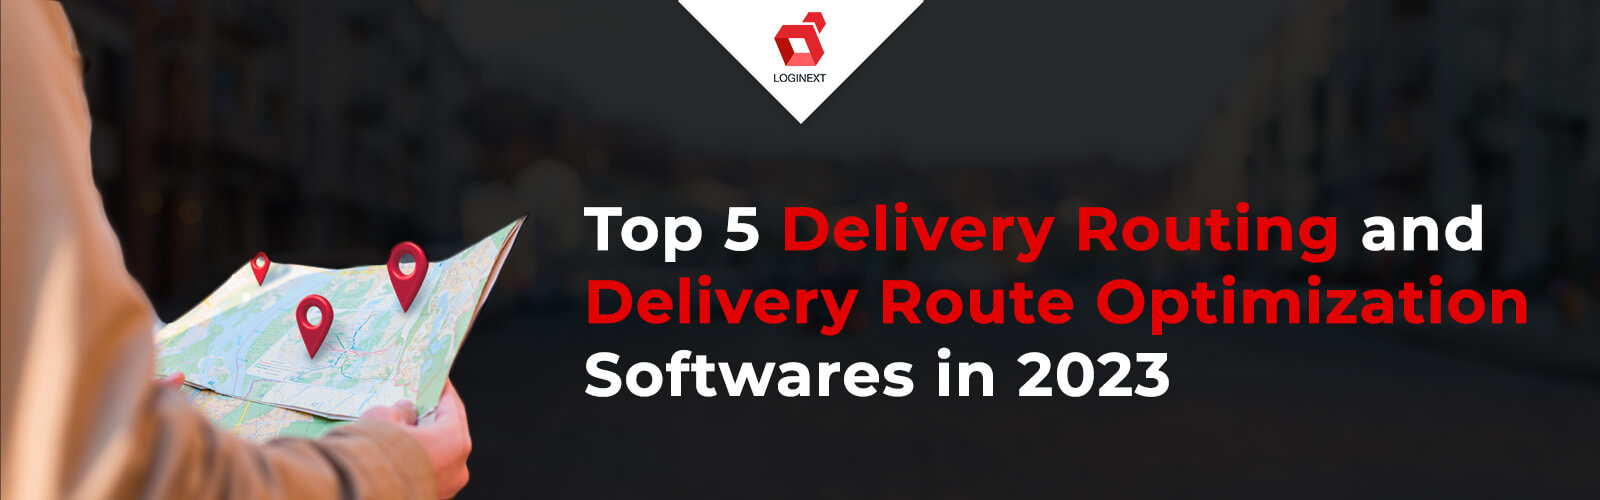 Top 5 Delivery Routing and Delivery Route Optimization Softwares in 2023 You Should Consider